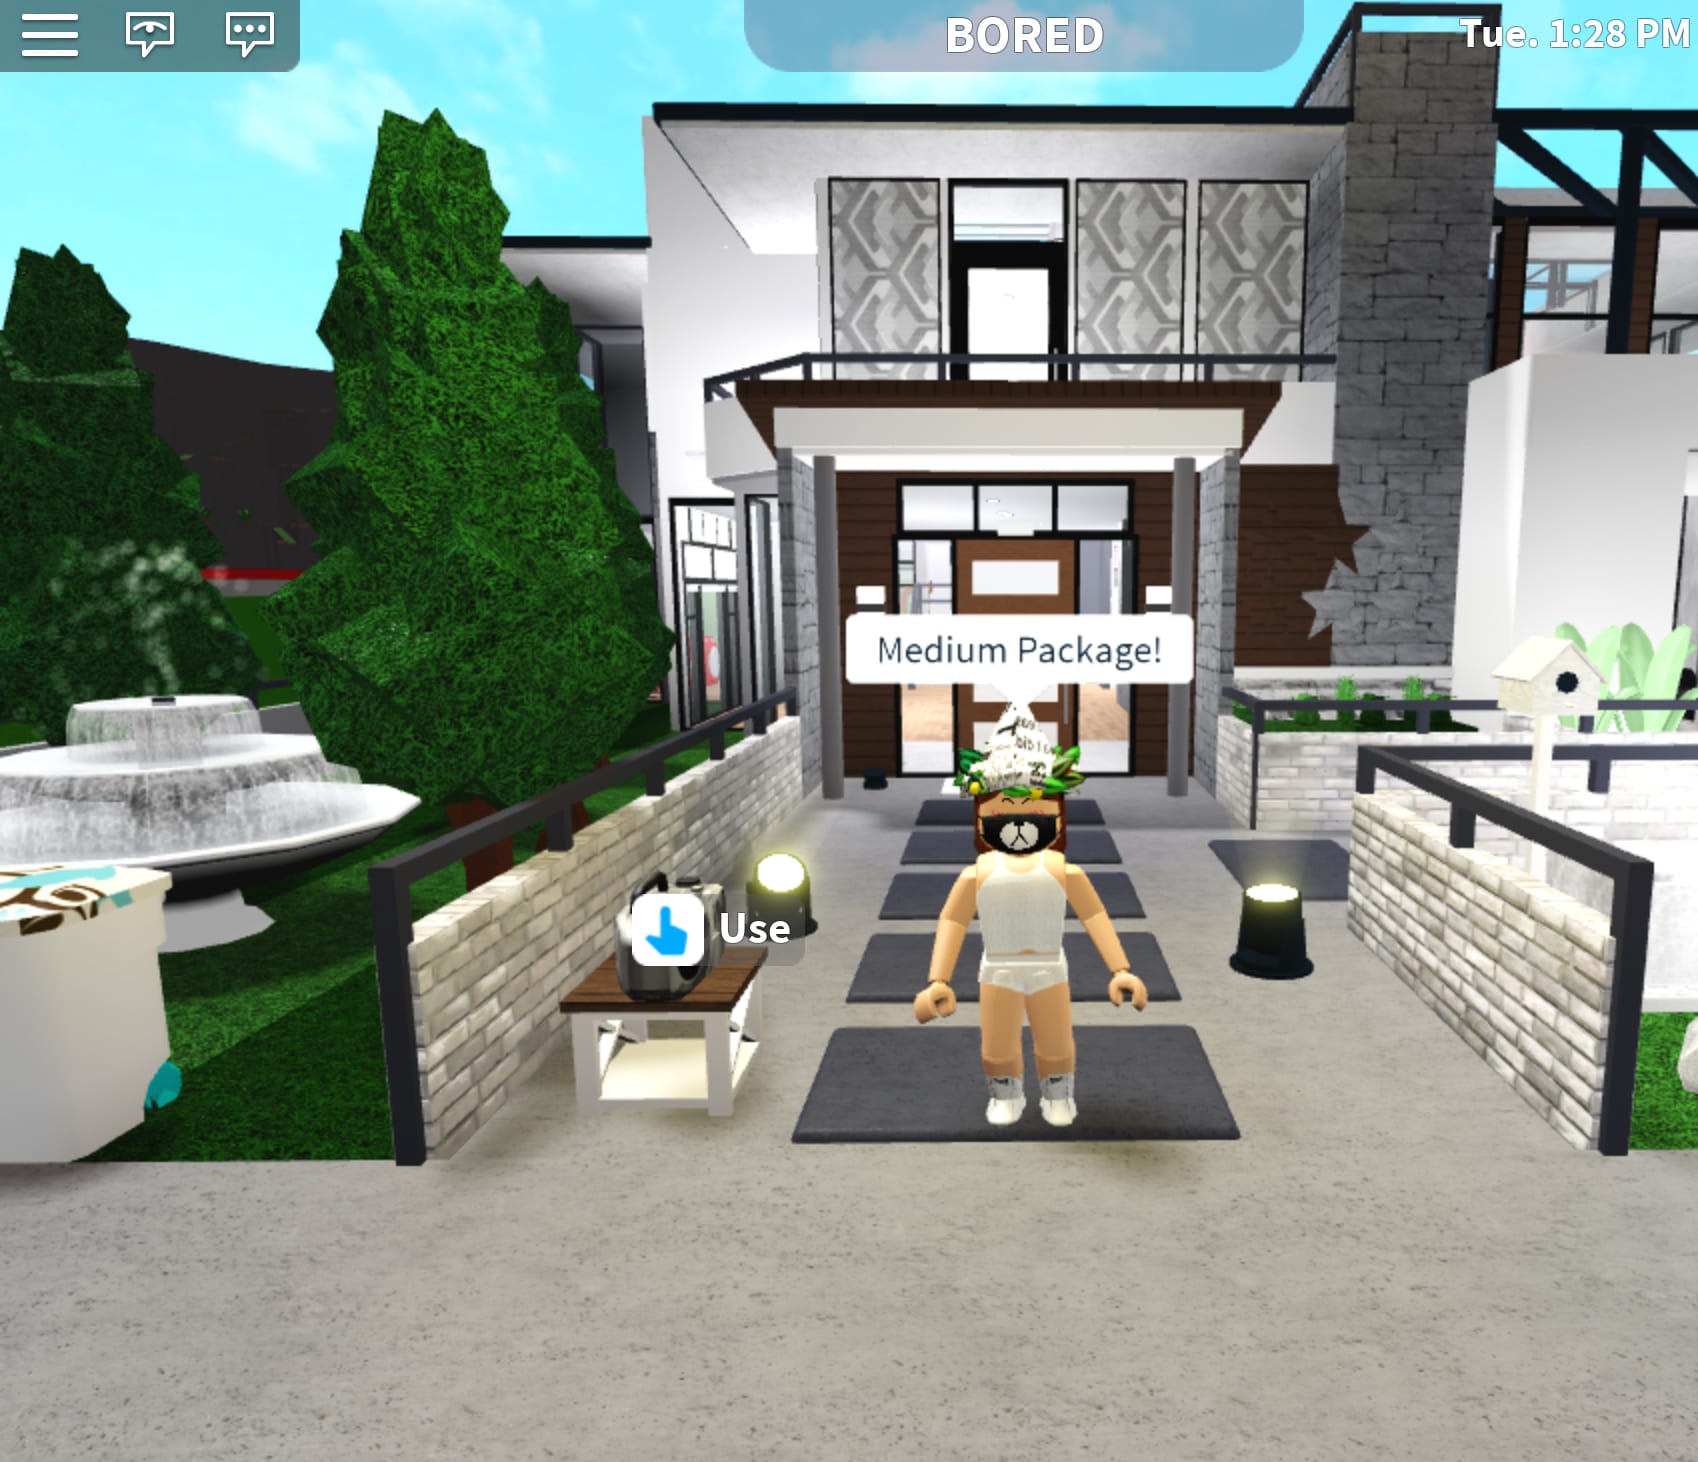 Build Your Dream House In Bloxburg By Mzdog10 - dream house roblox bloxburg houses